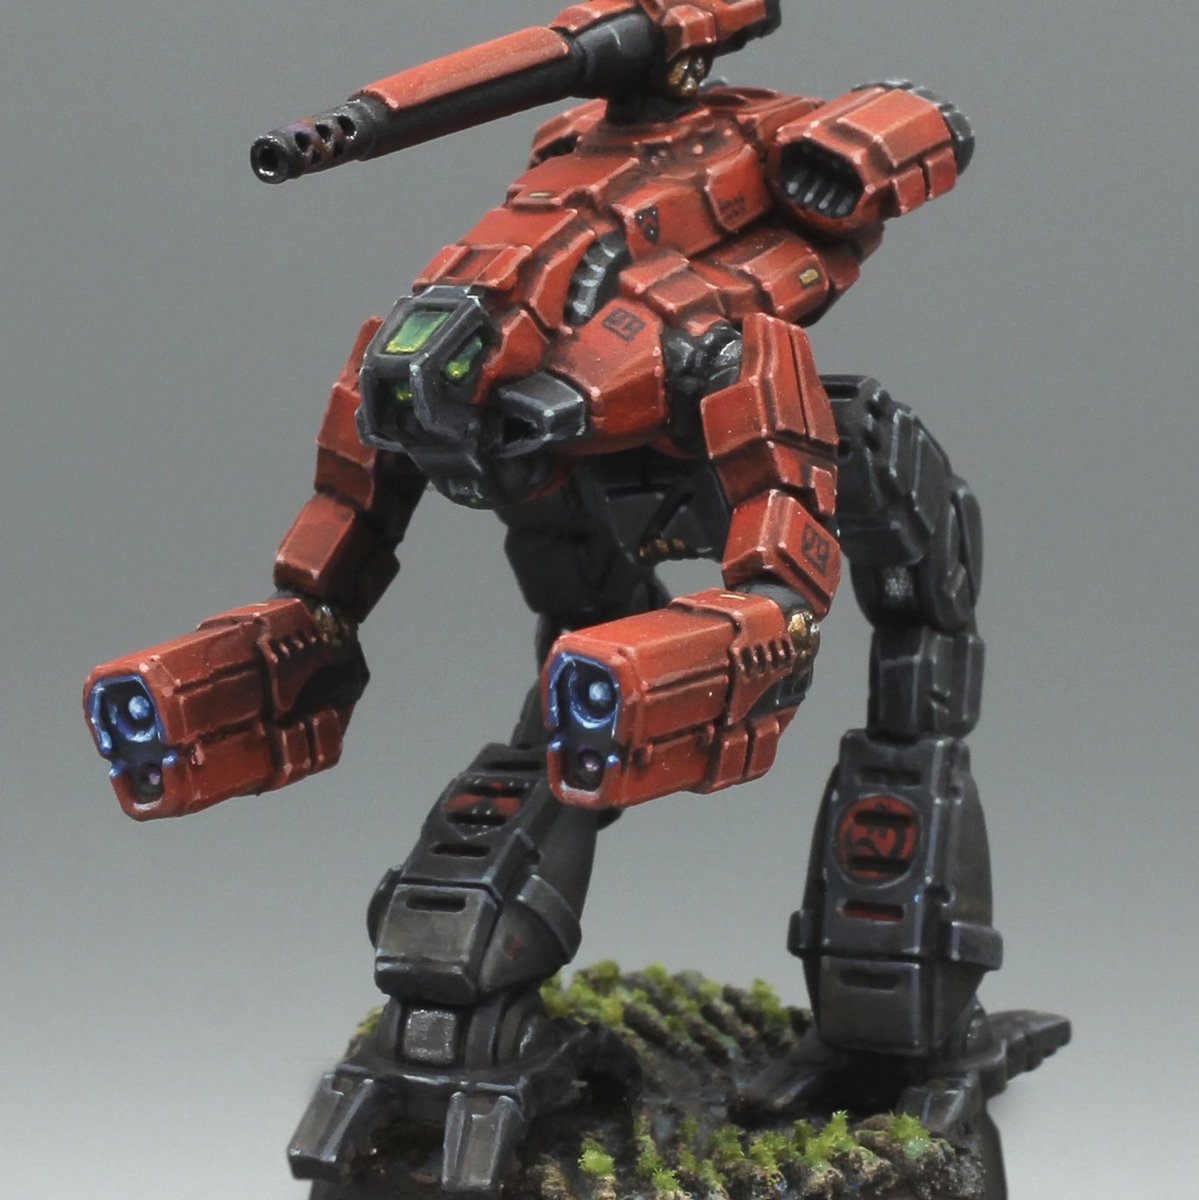 Look at this lady in red!
Wonderful figure and I am very happy with the way it came out.

Pew pew
#battletech